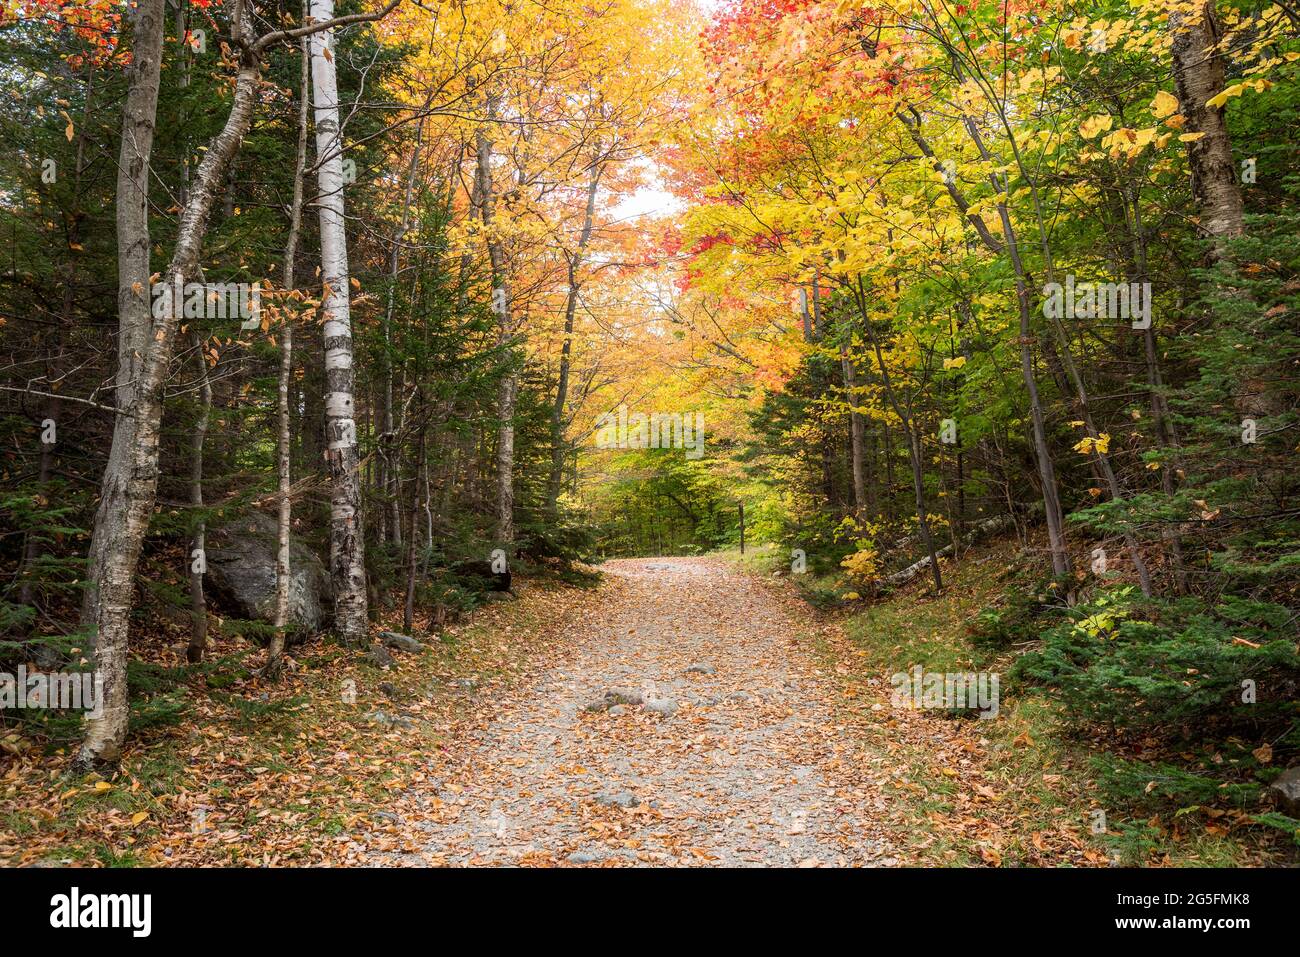 Deserted trail through al forest at the peak of fall foliage Stock Photo